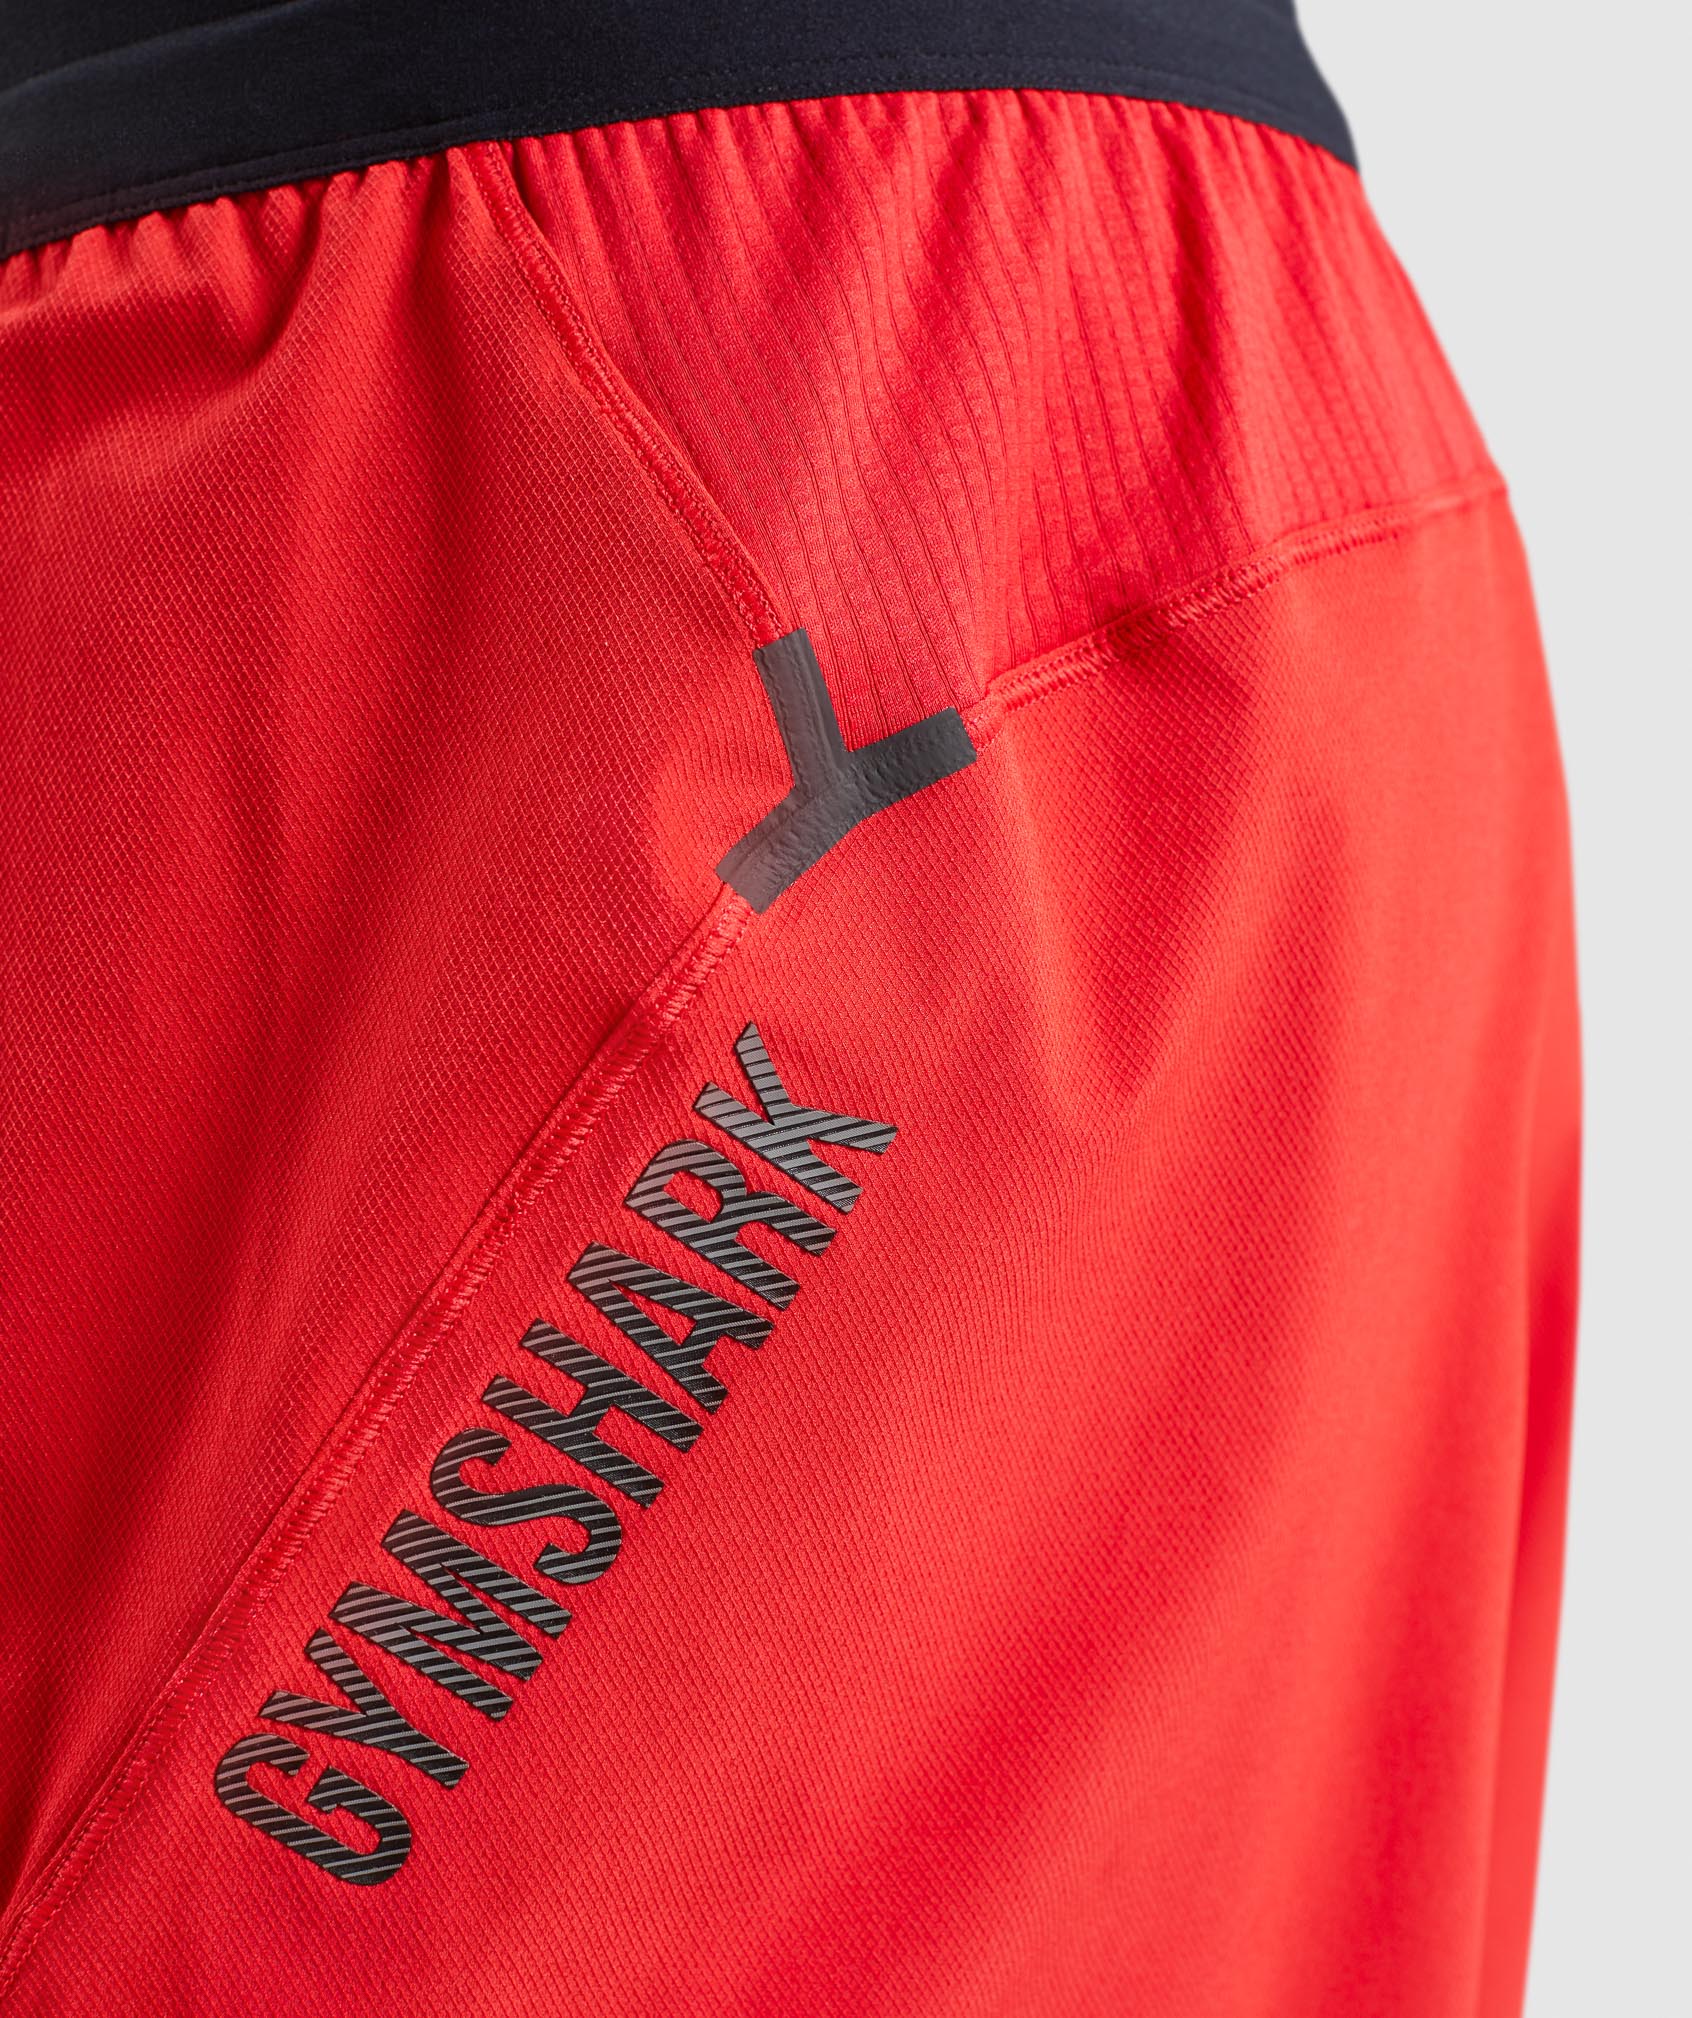 Apex Shorts in Red